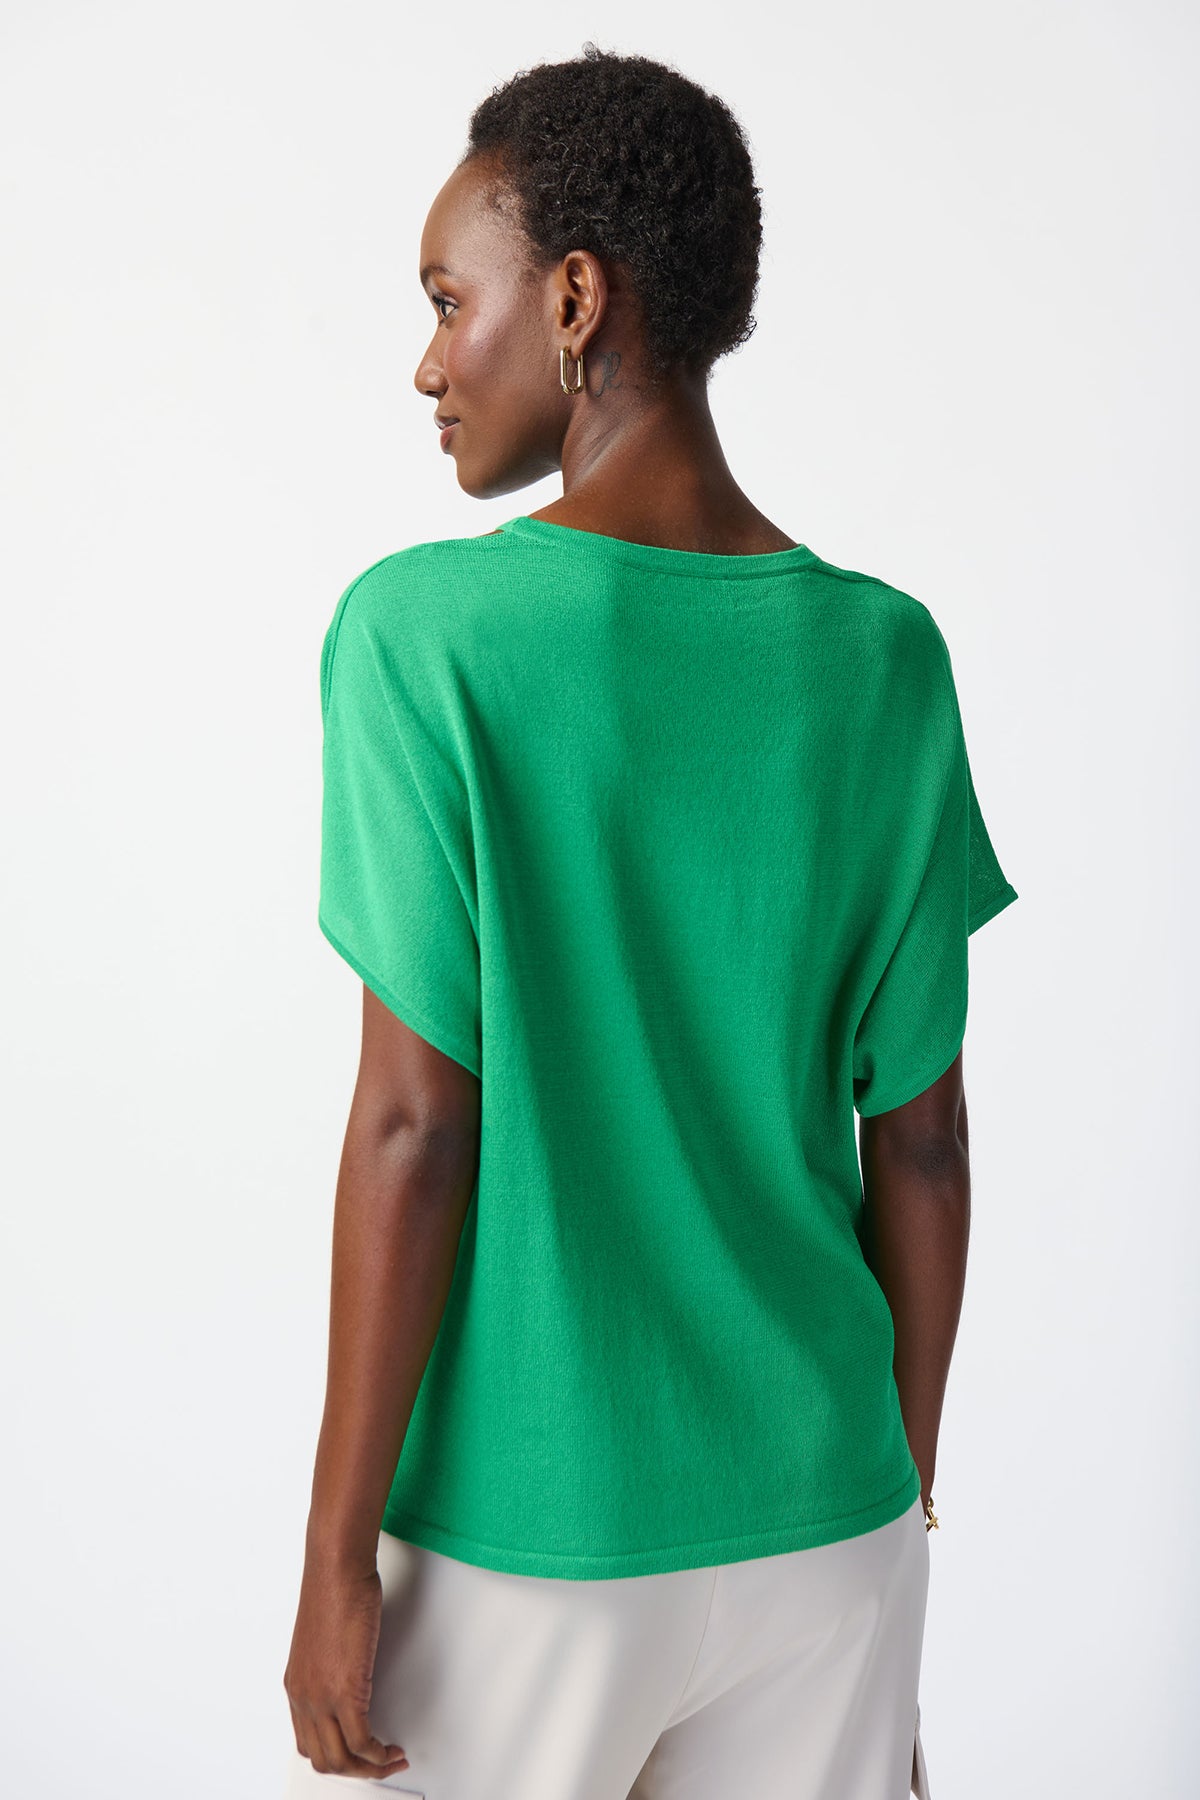 Short Sleeve with Neck Detail